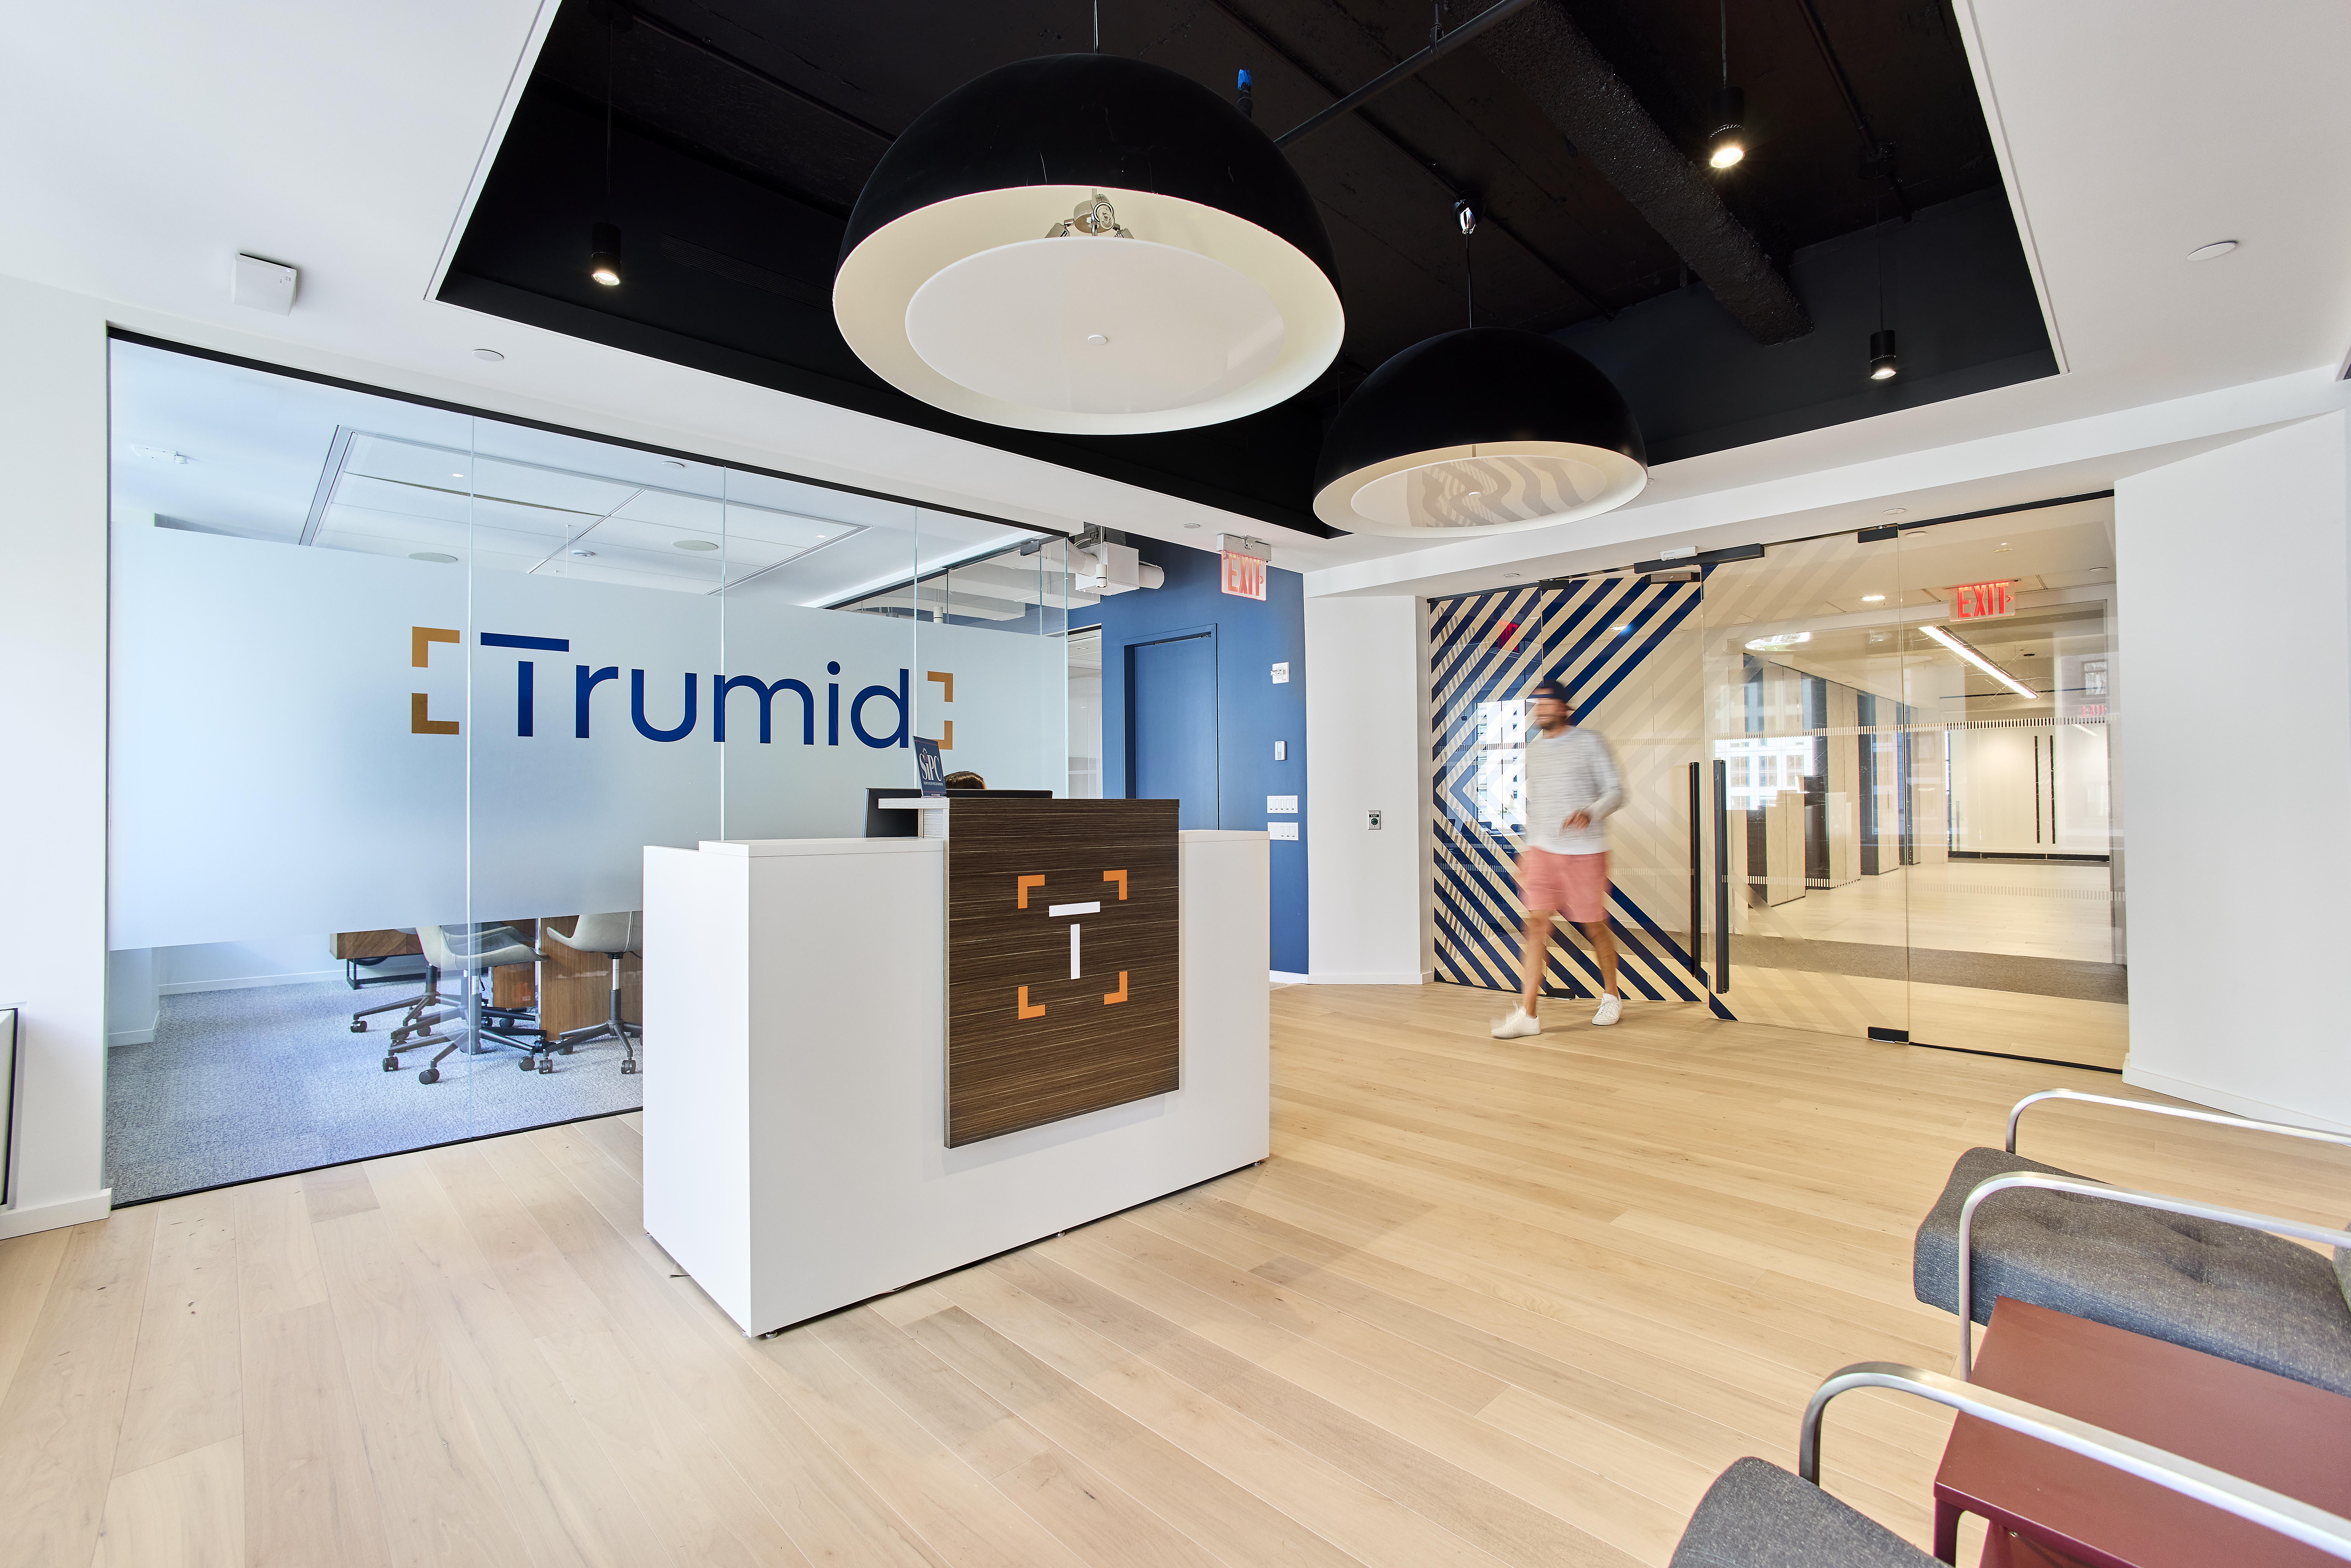 Trumid office photo showing logo, wood floors and vaulted ceiling.